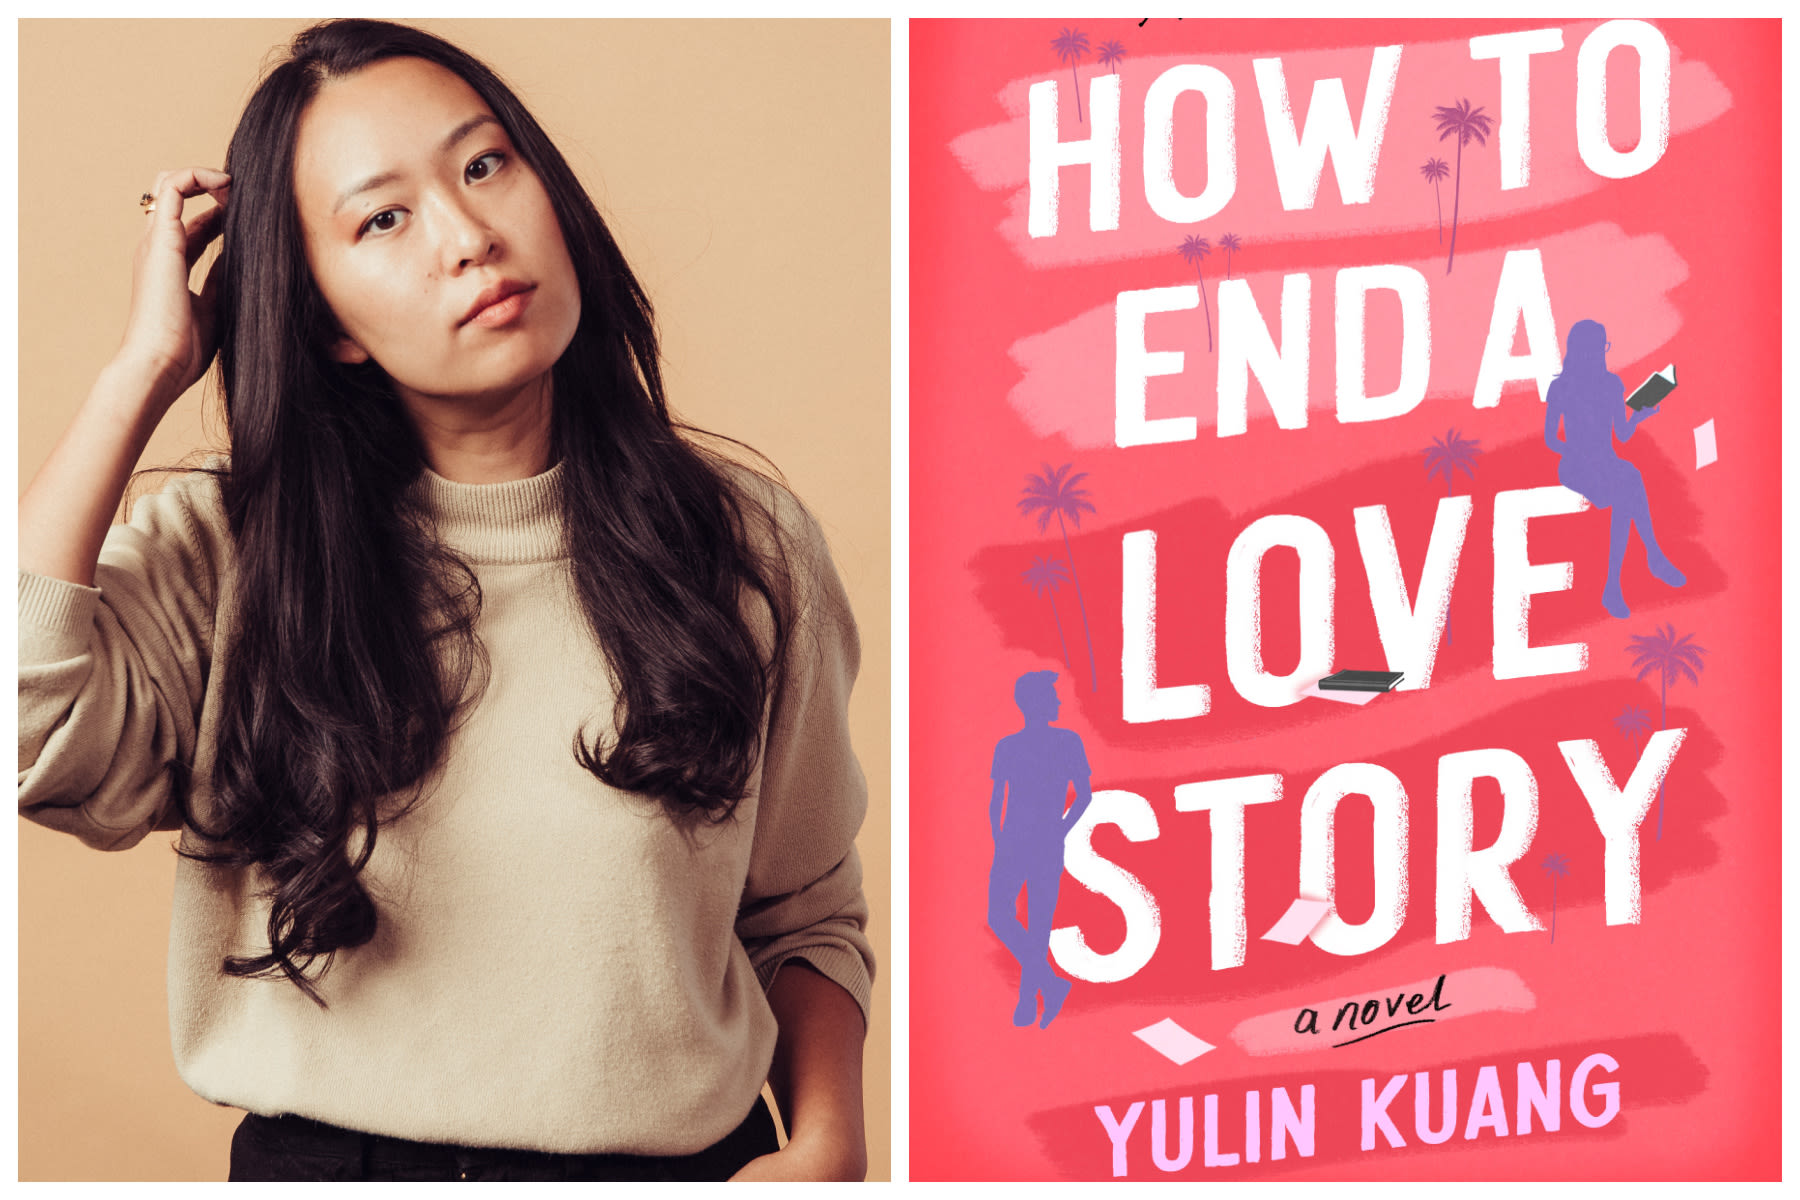 ‘How to End a Love Story’ Author Yulin Kuang on Plans for TV Adaptation of Her Debut Novel and Writing Emily Henry...